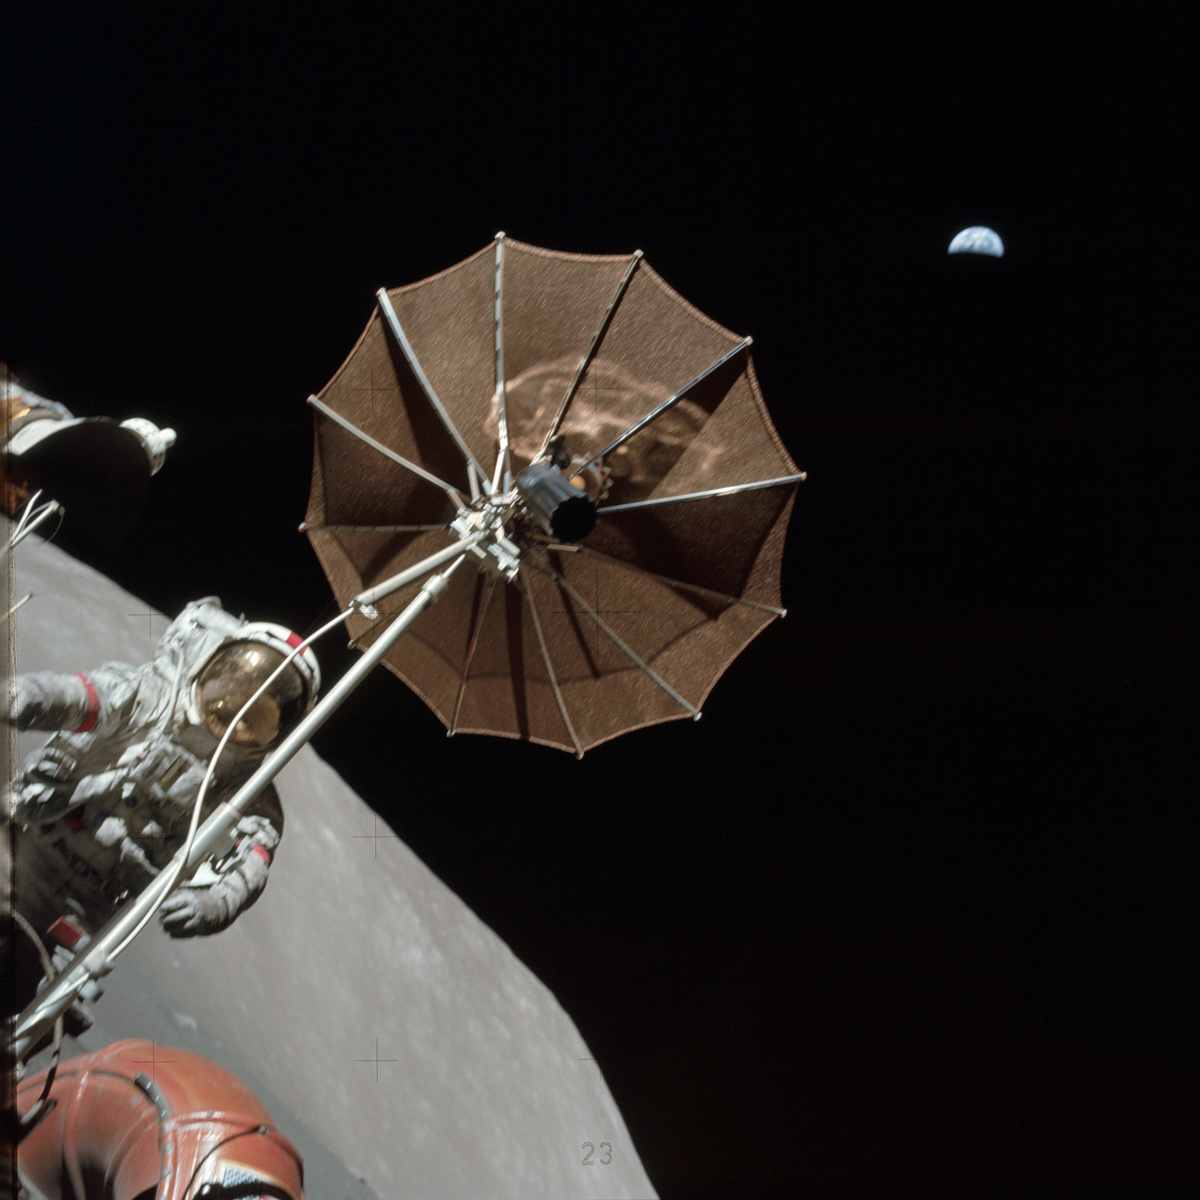 Astronaut on moon holding antenna with Earth in the background